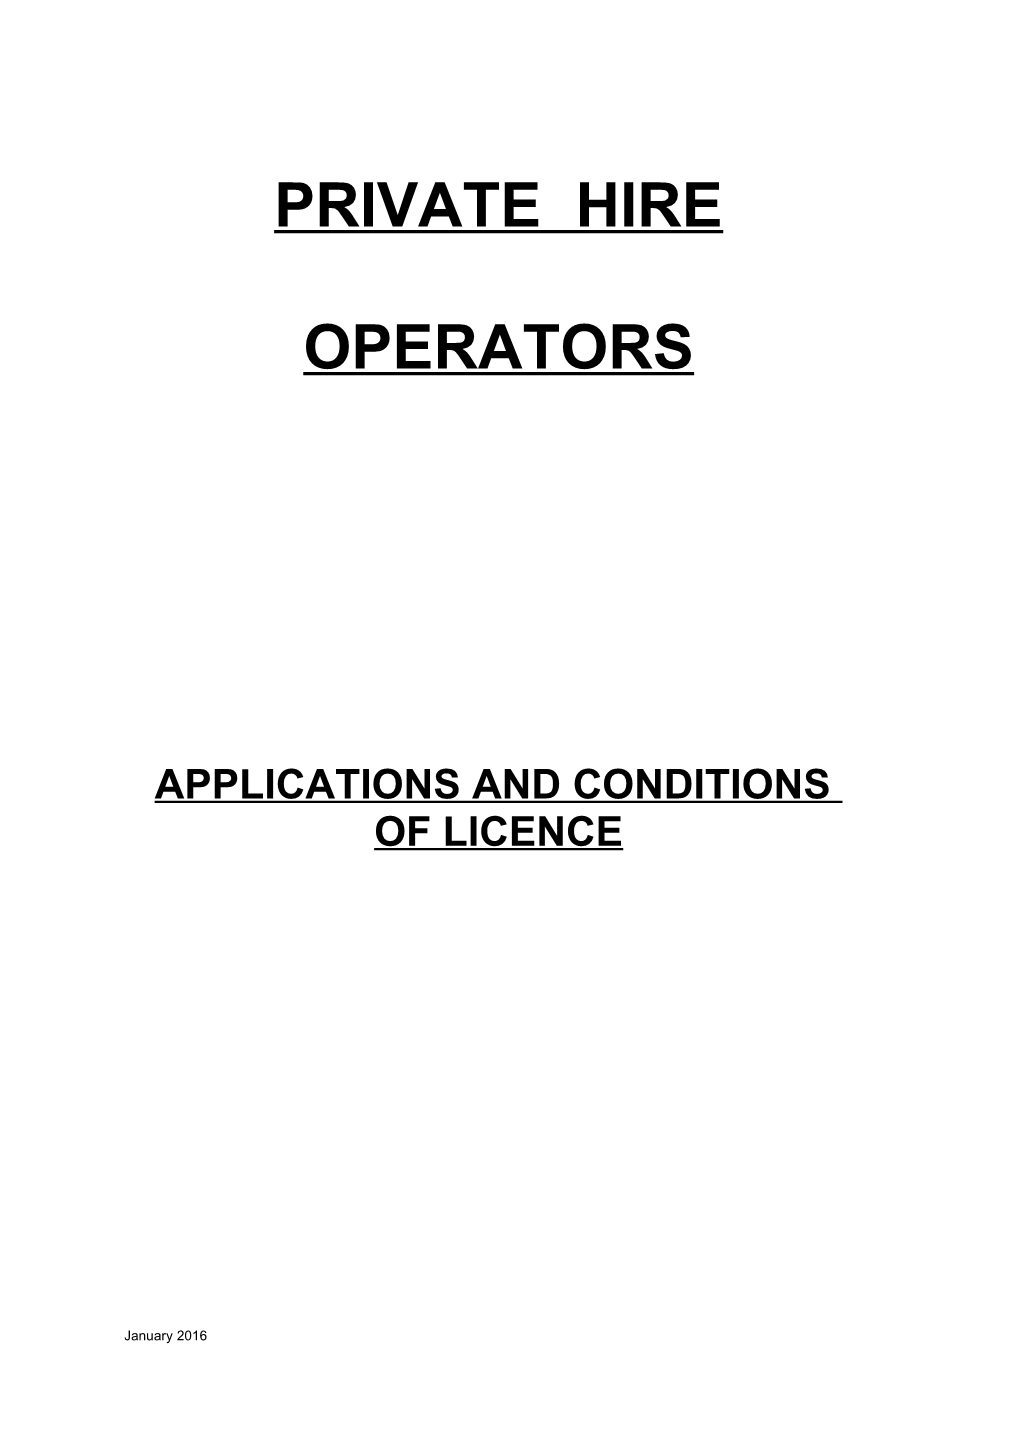 Applications and Conditions